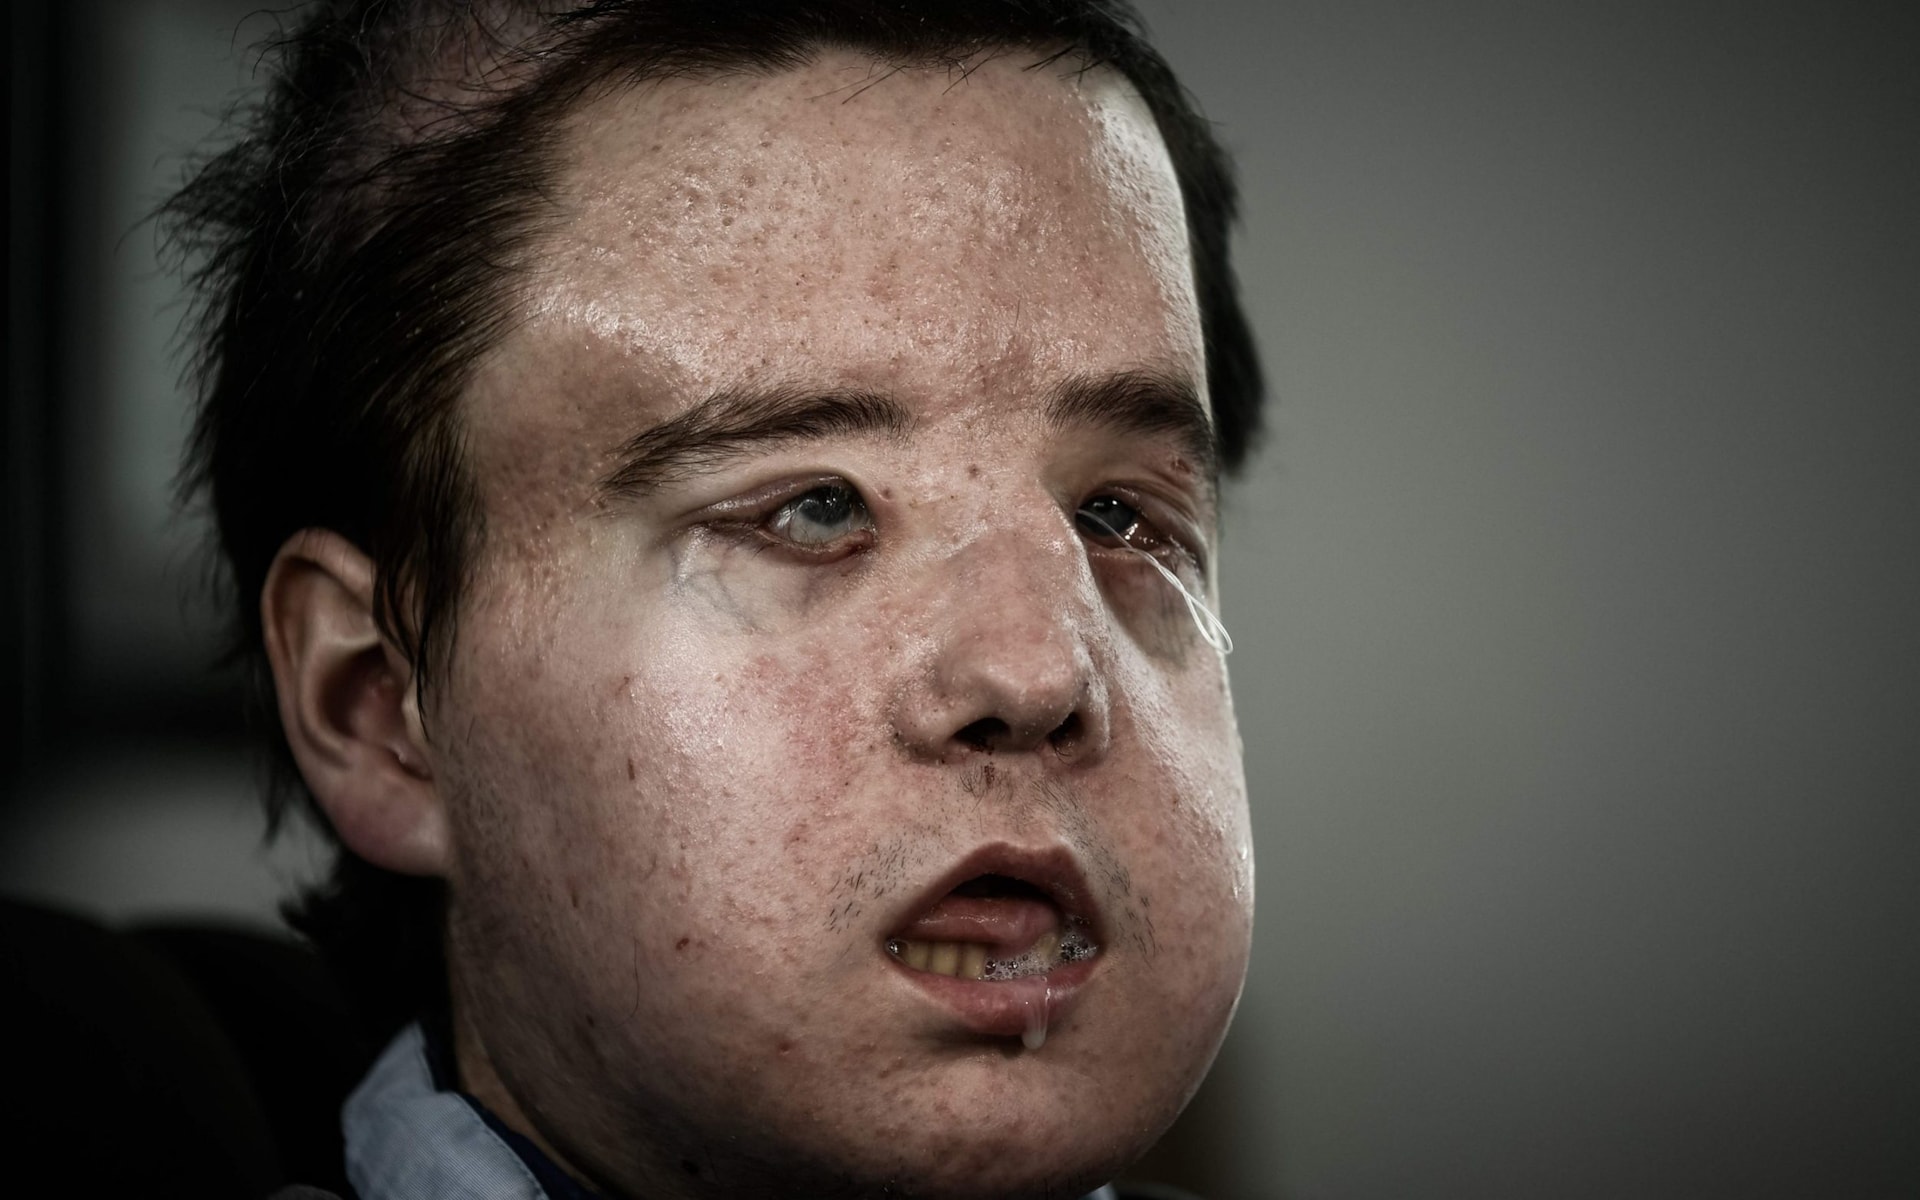 Jerome Hamon is the first man in the world to undergo two face transplants after the first was rejected